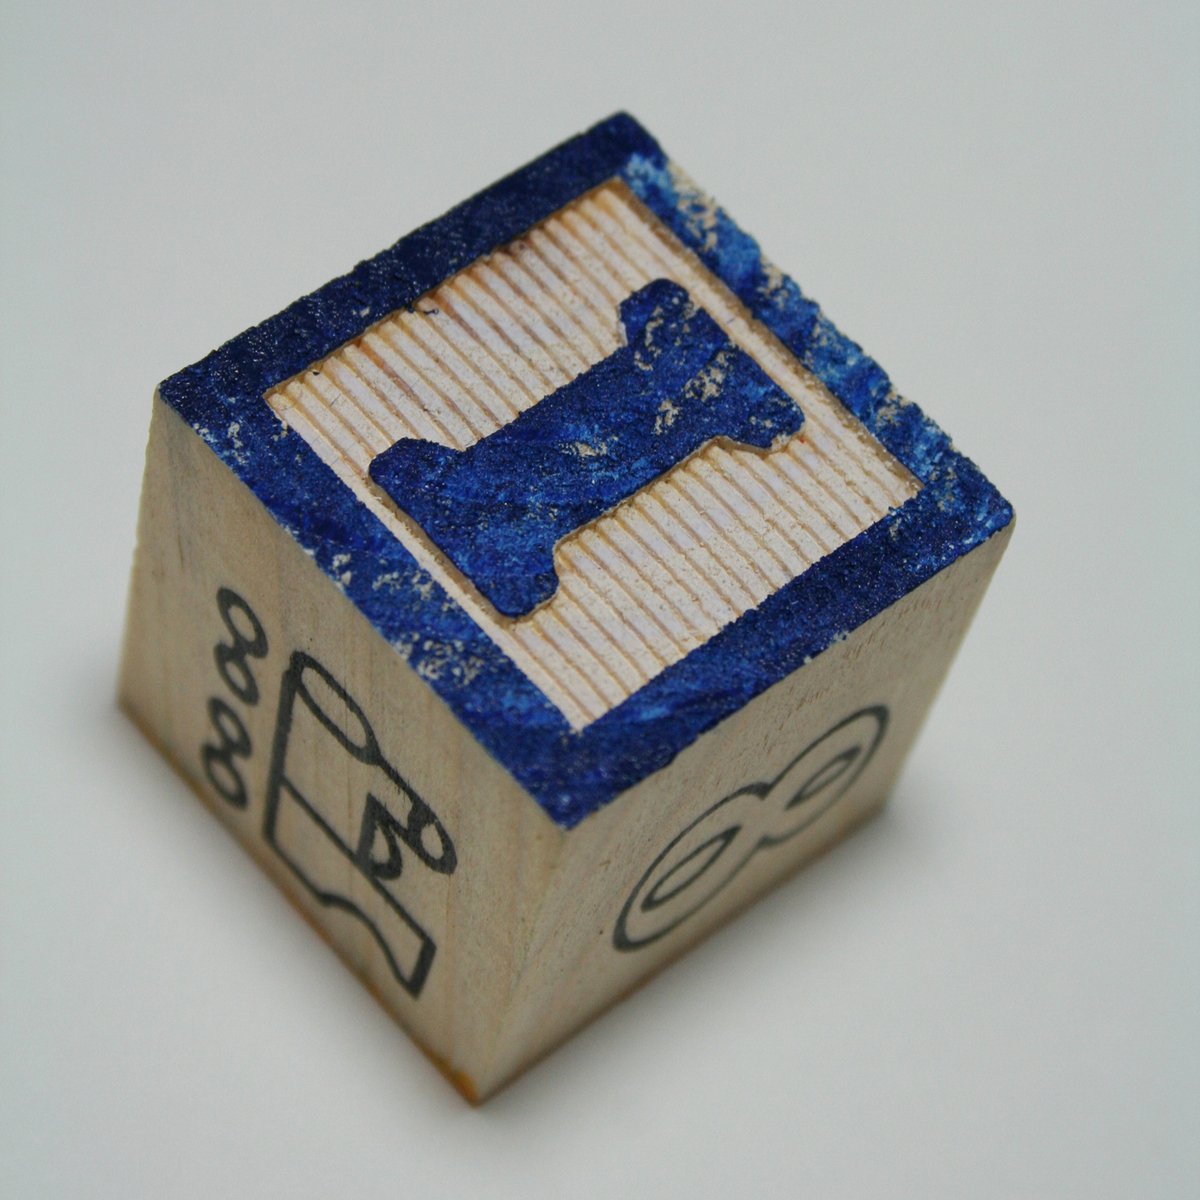 a wooden dice sitting on top of a white surface